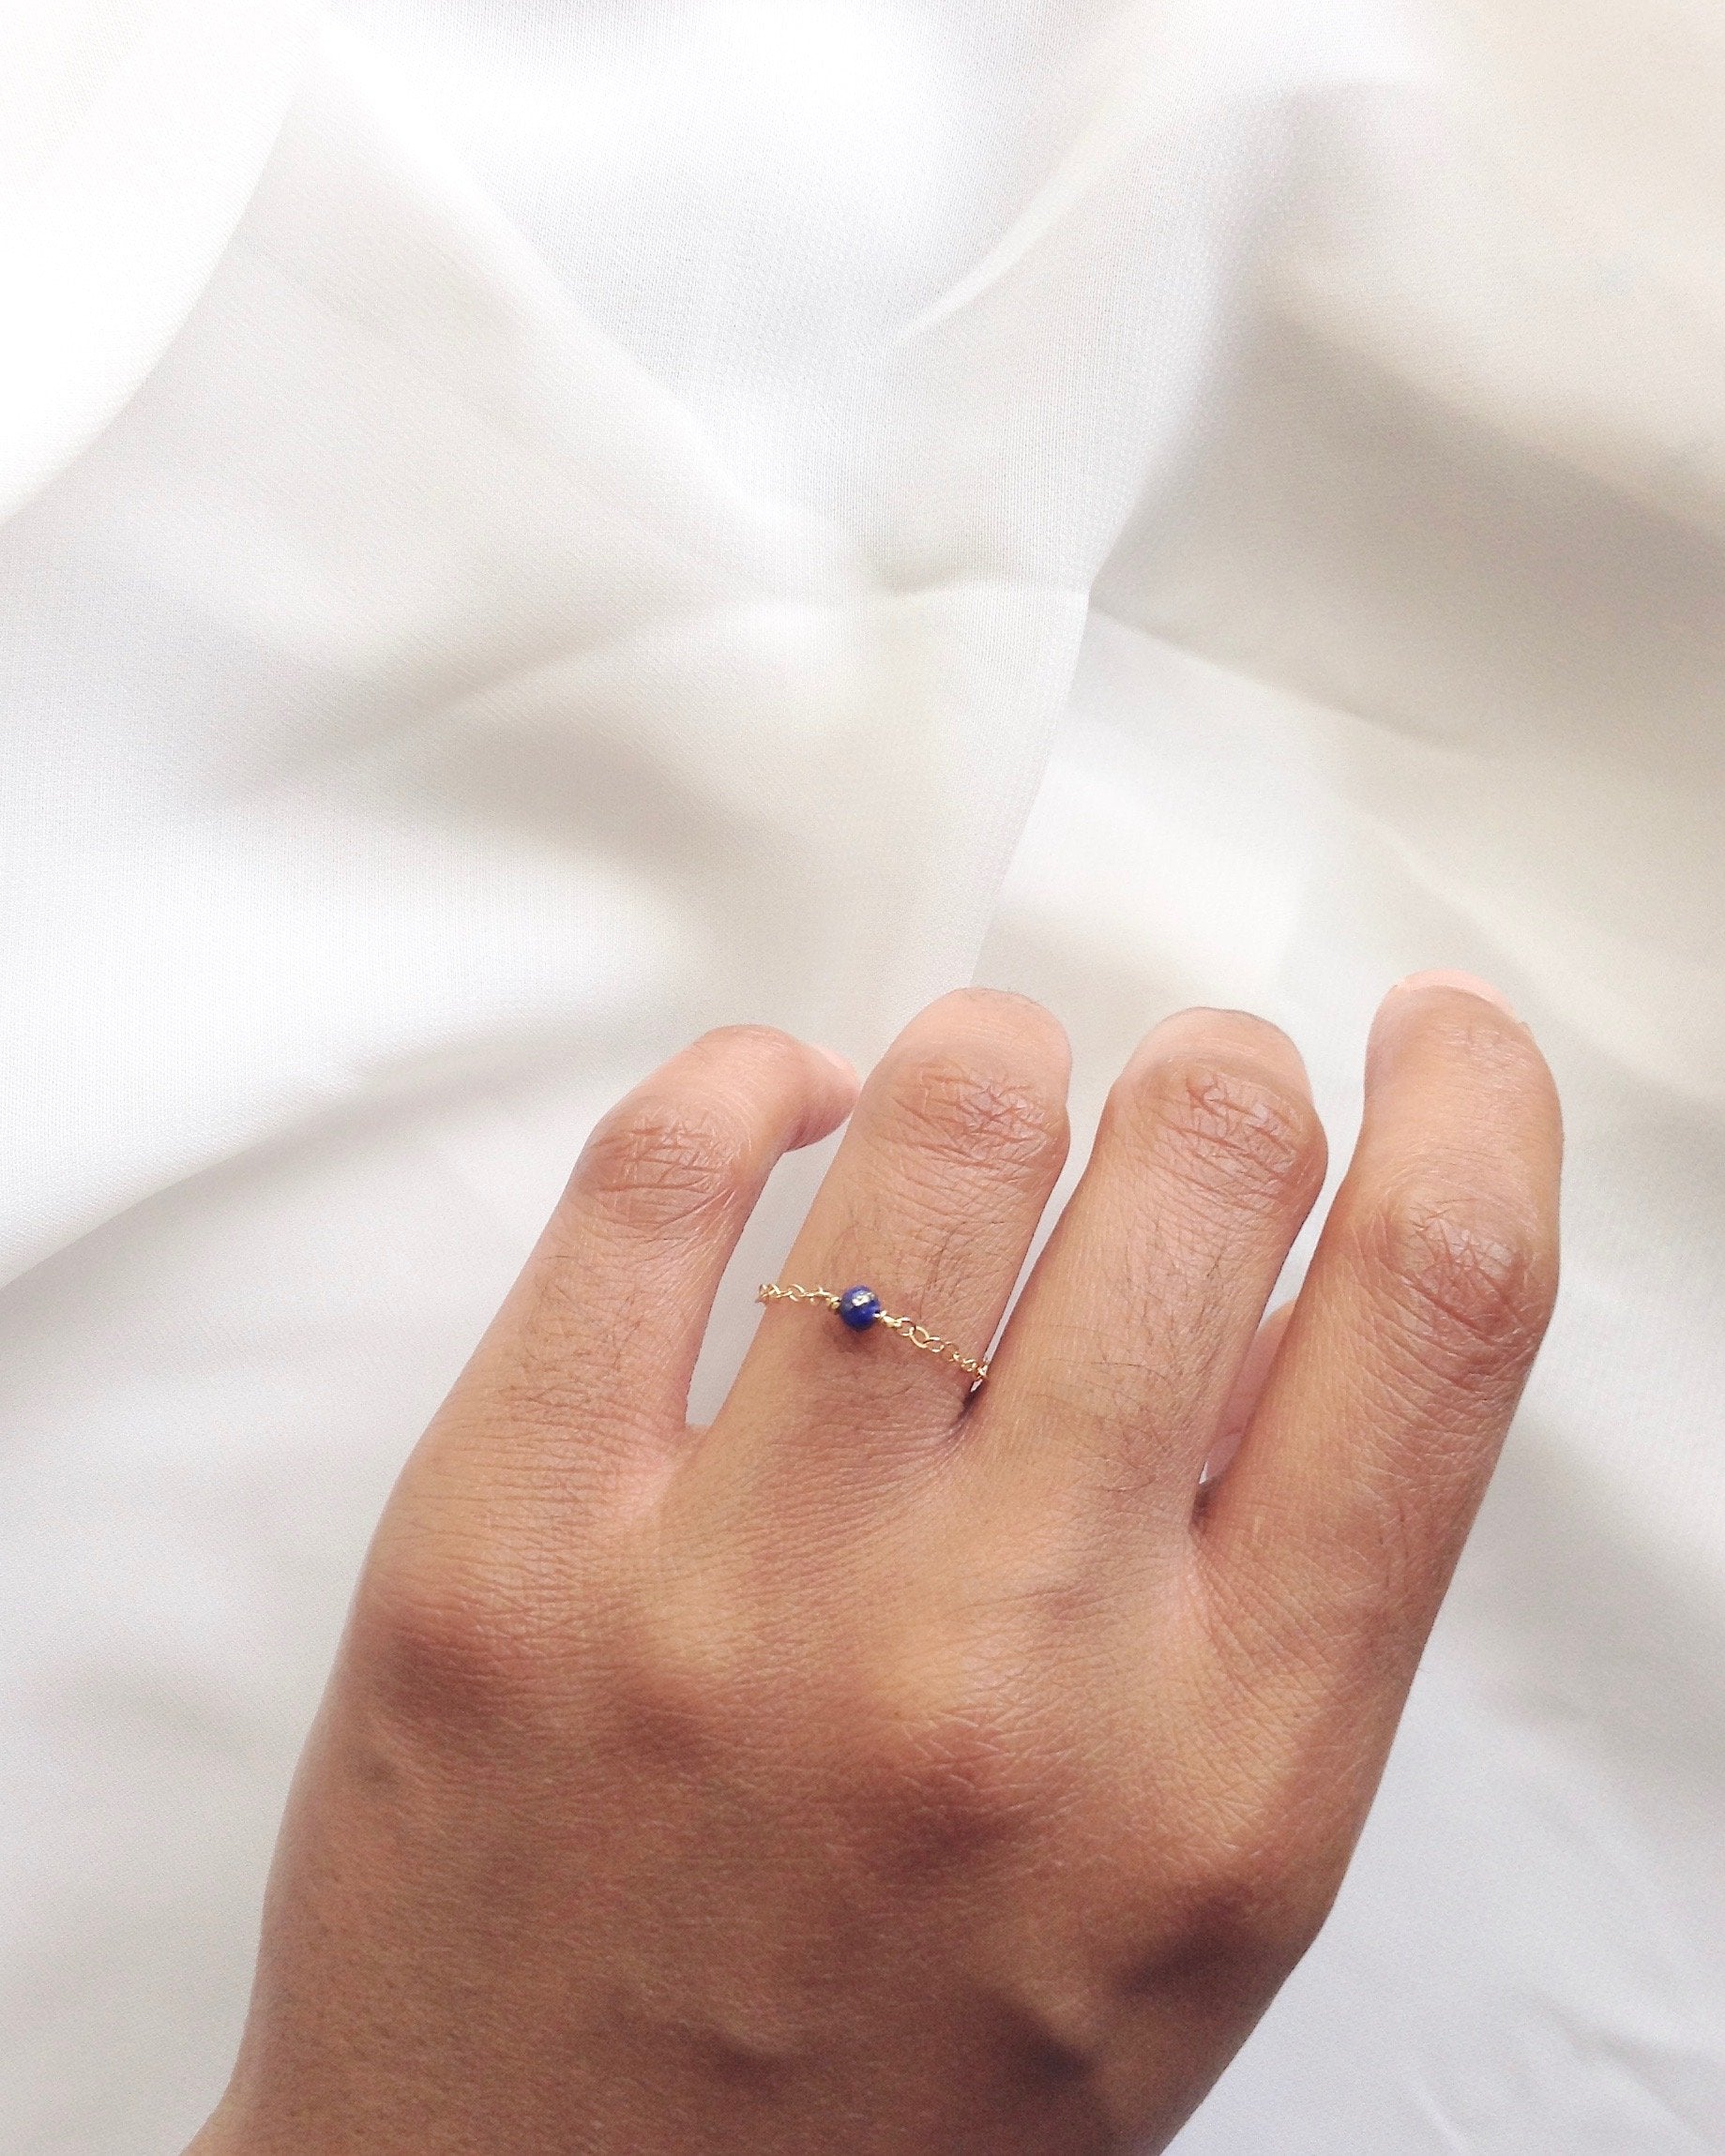 Real Lapis Lazuli Minimalist Ring in Gold Filled or Sterling Silver | Dainty Ring | IB Jewelry